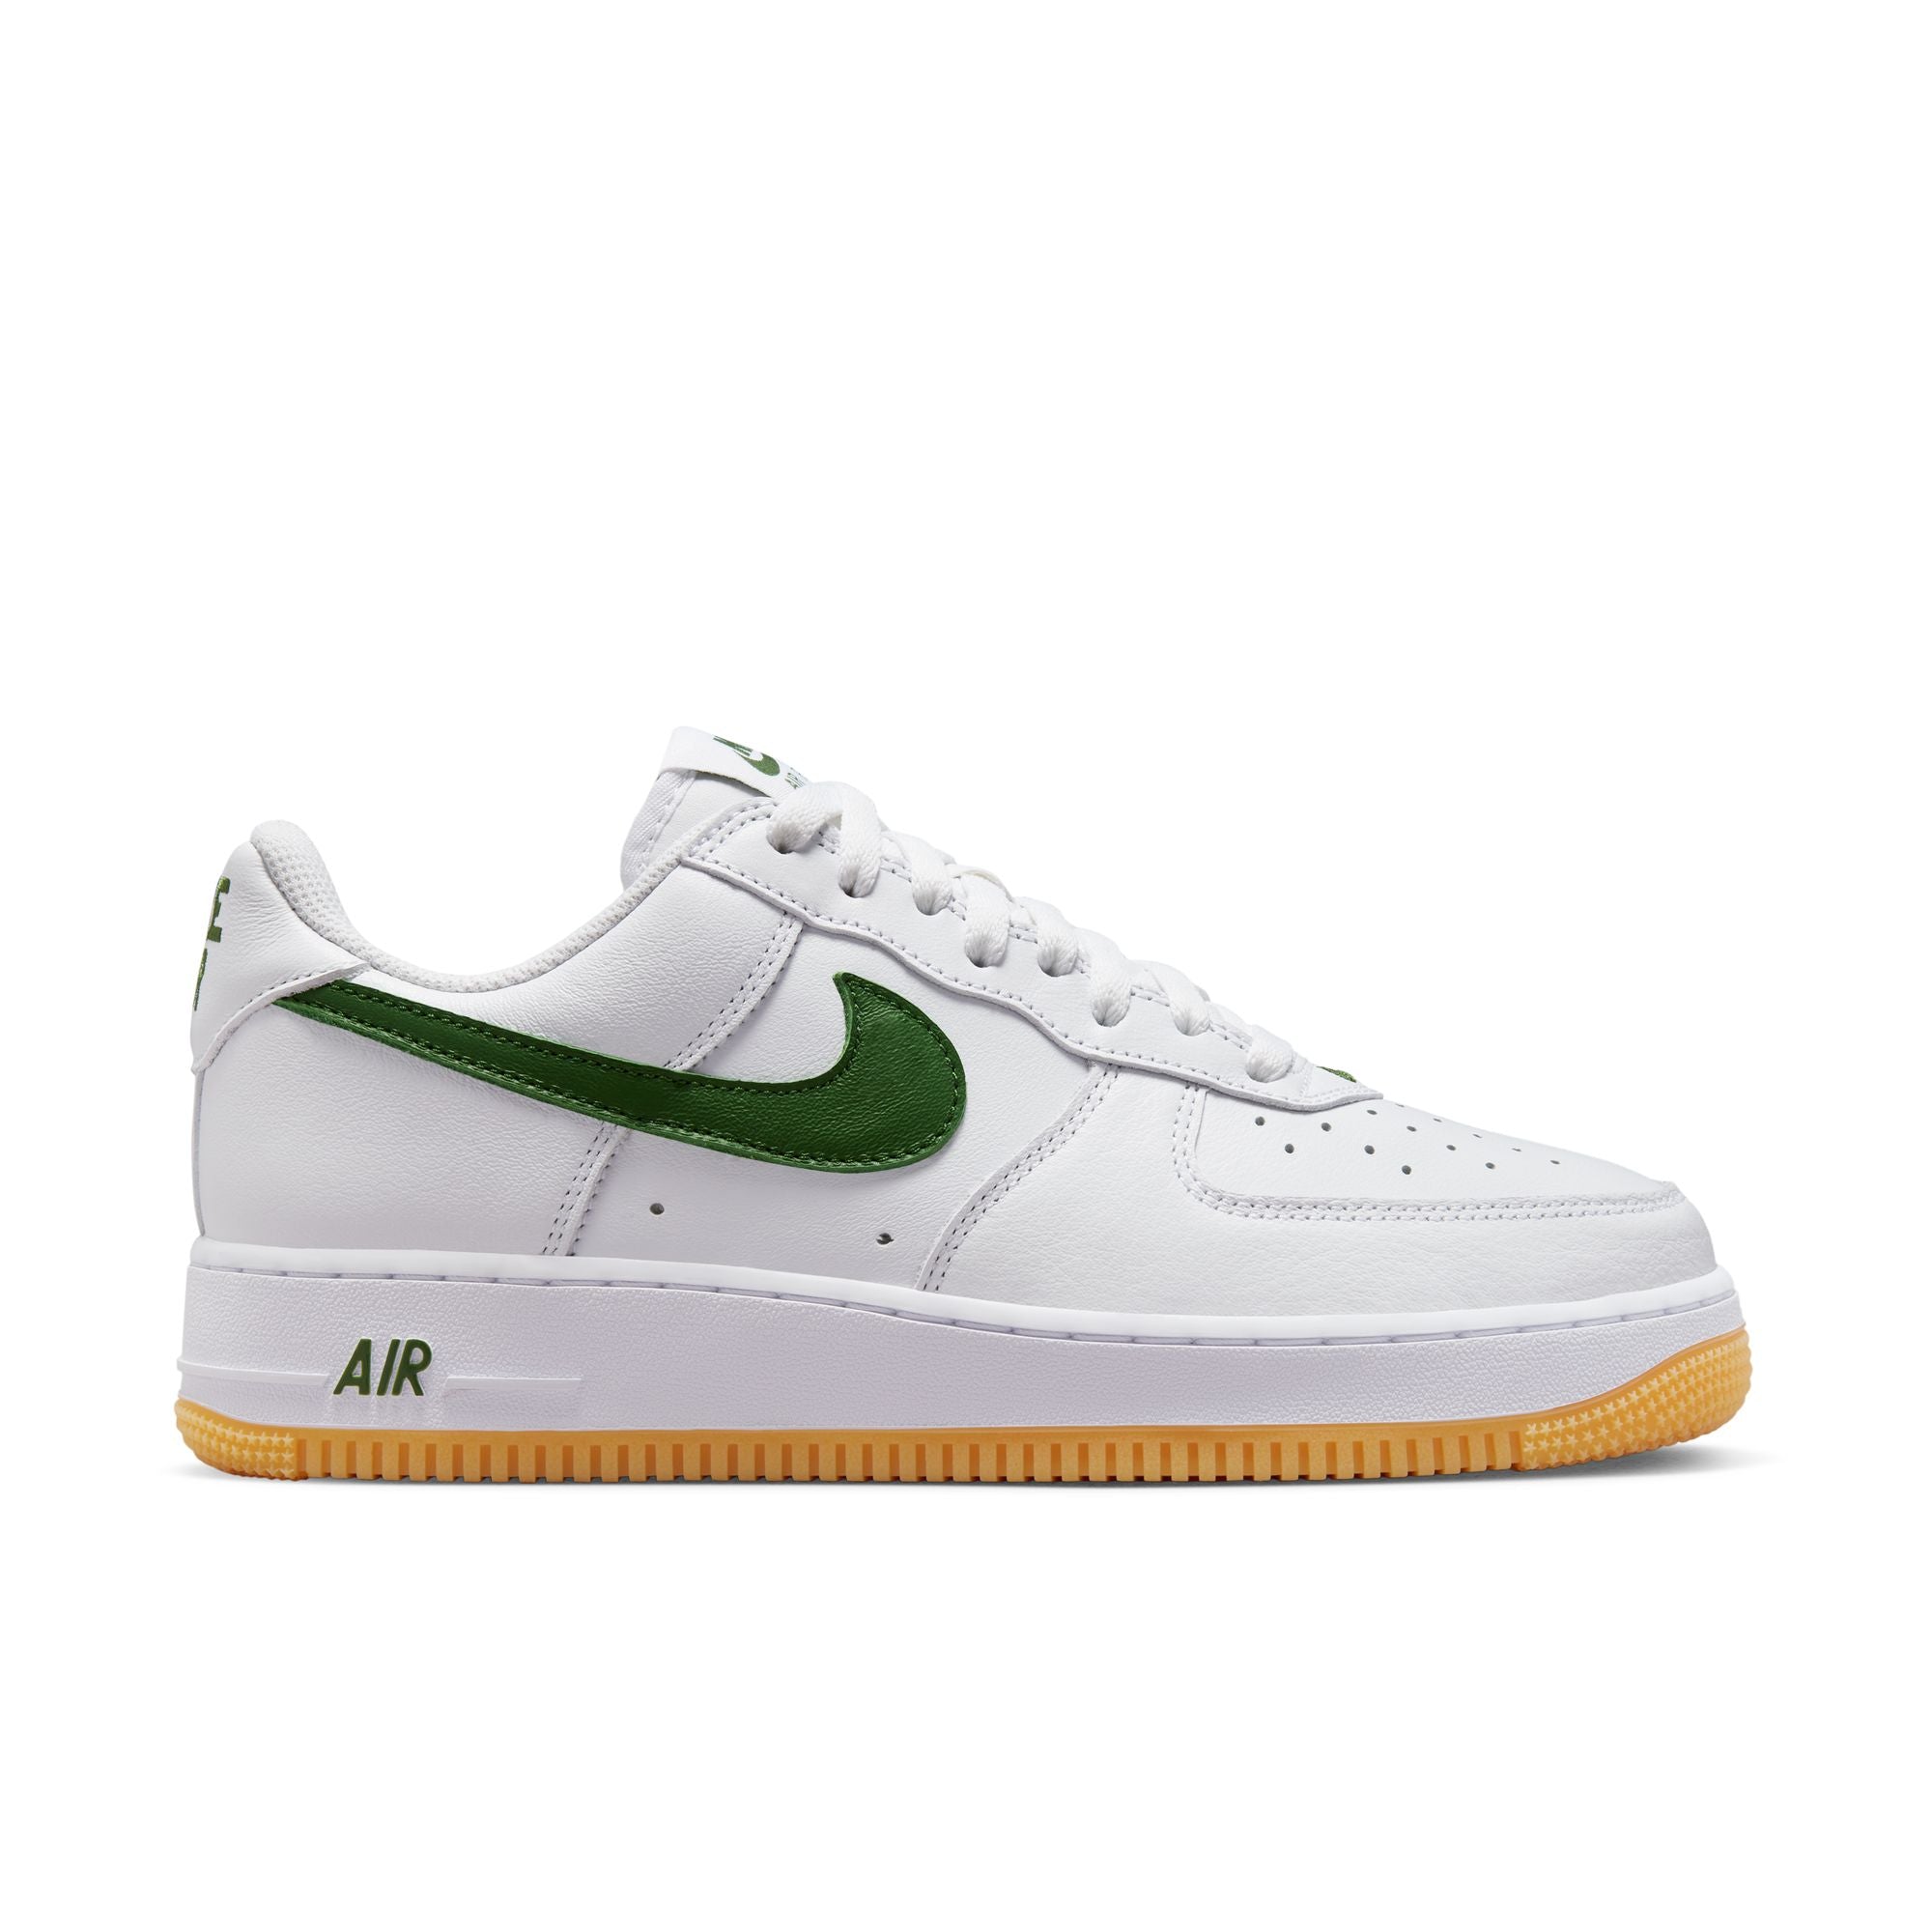 NIKE - Air Force 1 Low Retro Qs - (White/Forest Green-Gum Yellow) view 1